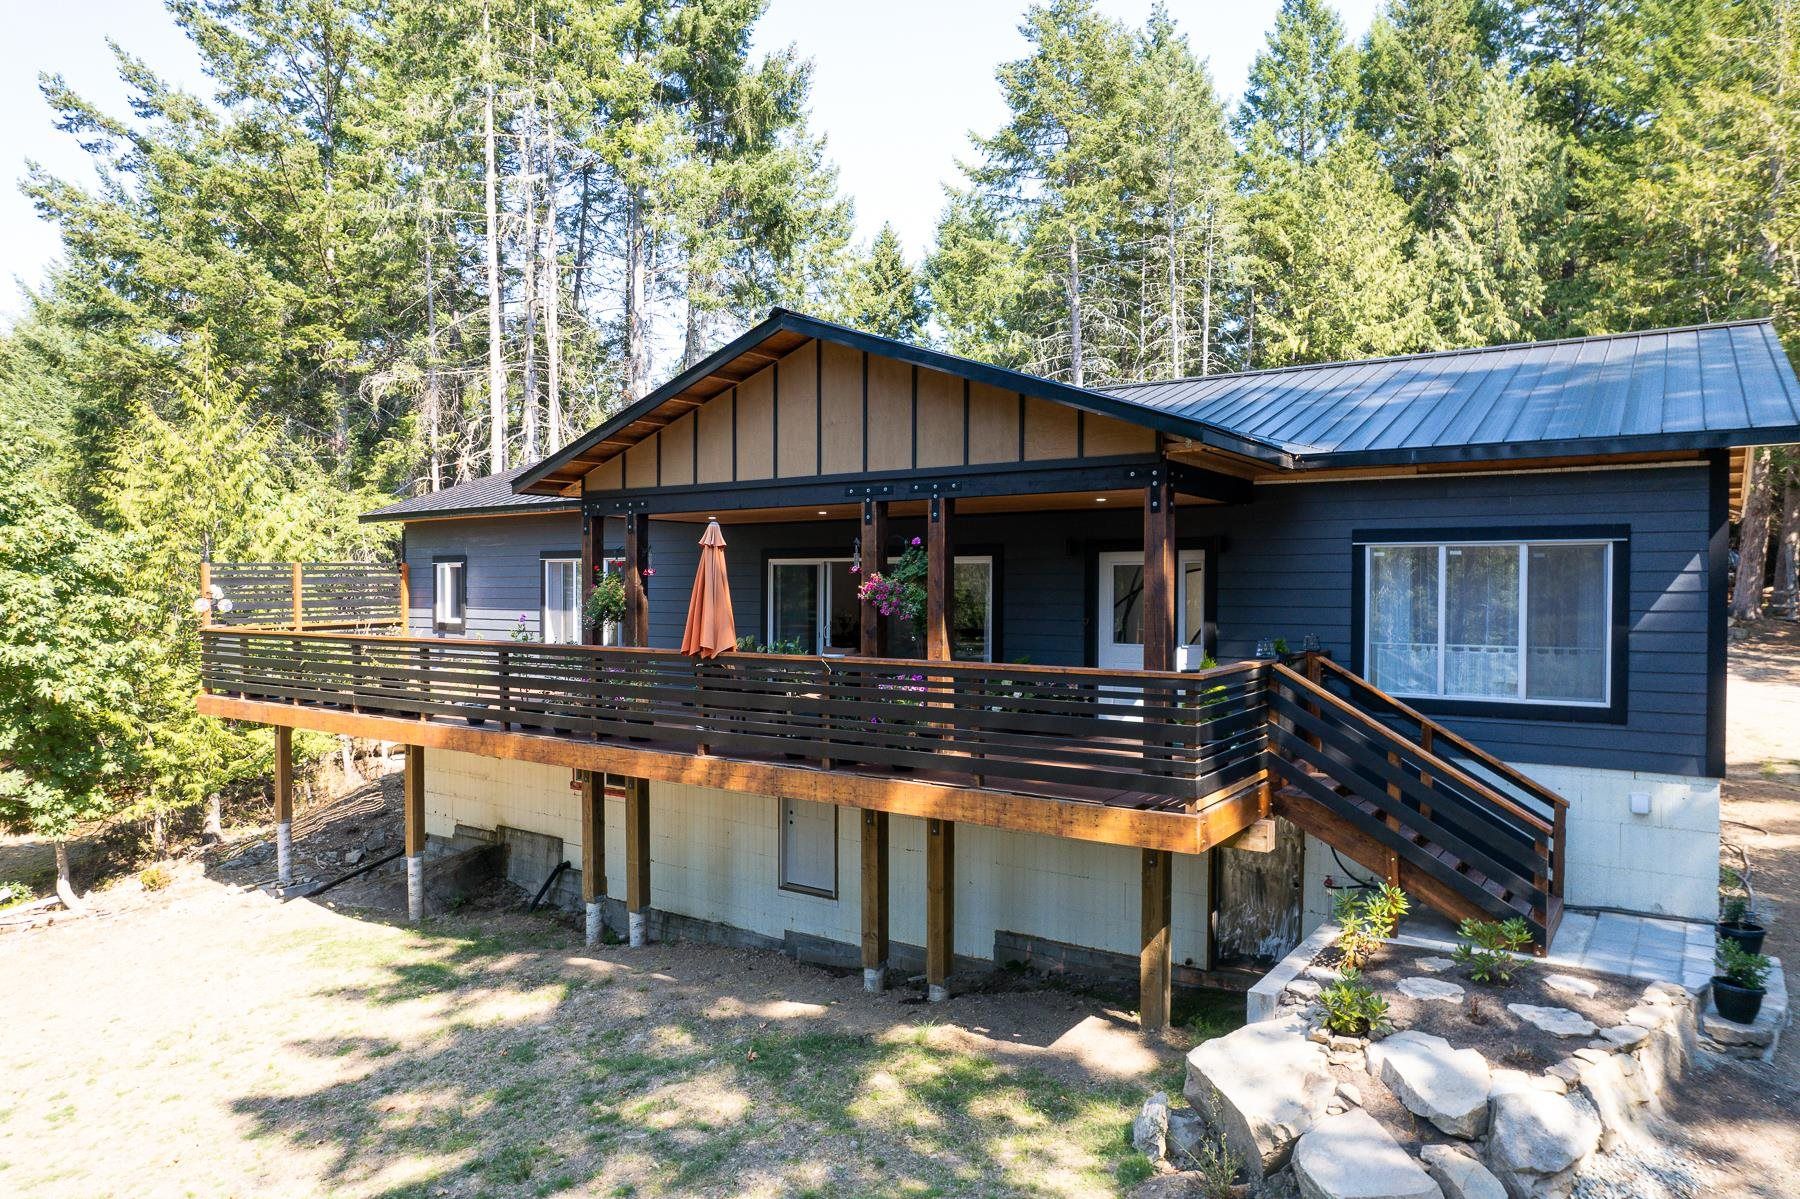 Main Photo: 560 DINNER BAY ROAD in : Mayne Island House for sale : MLS®# R2611150